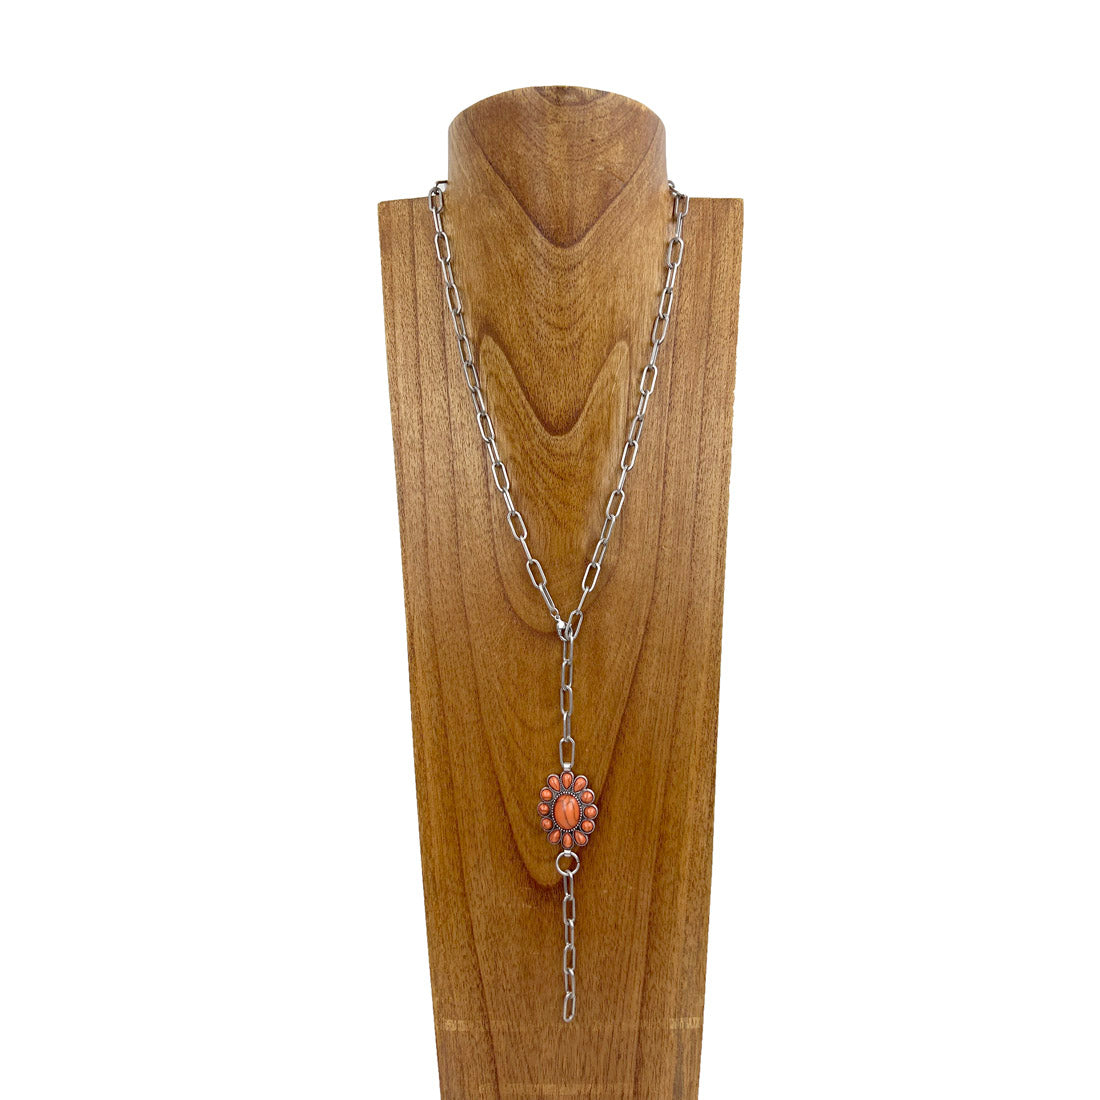 NKS230812-27            Silver metal chain with orange stone concho Necklace